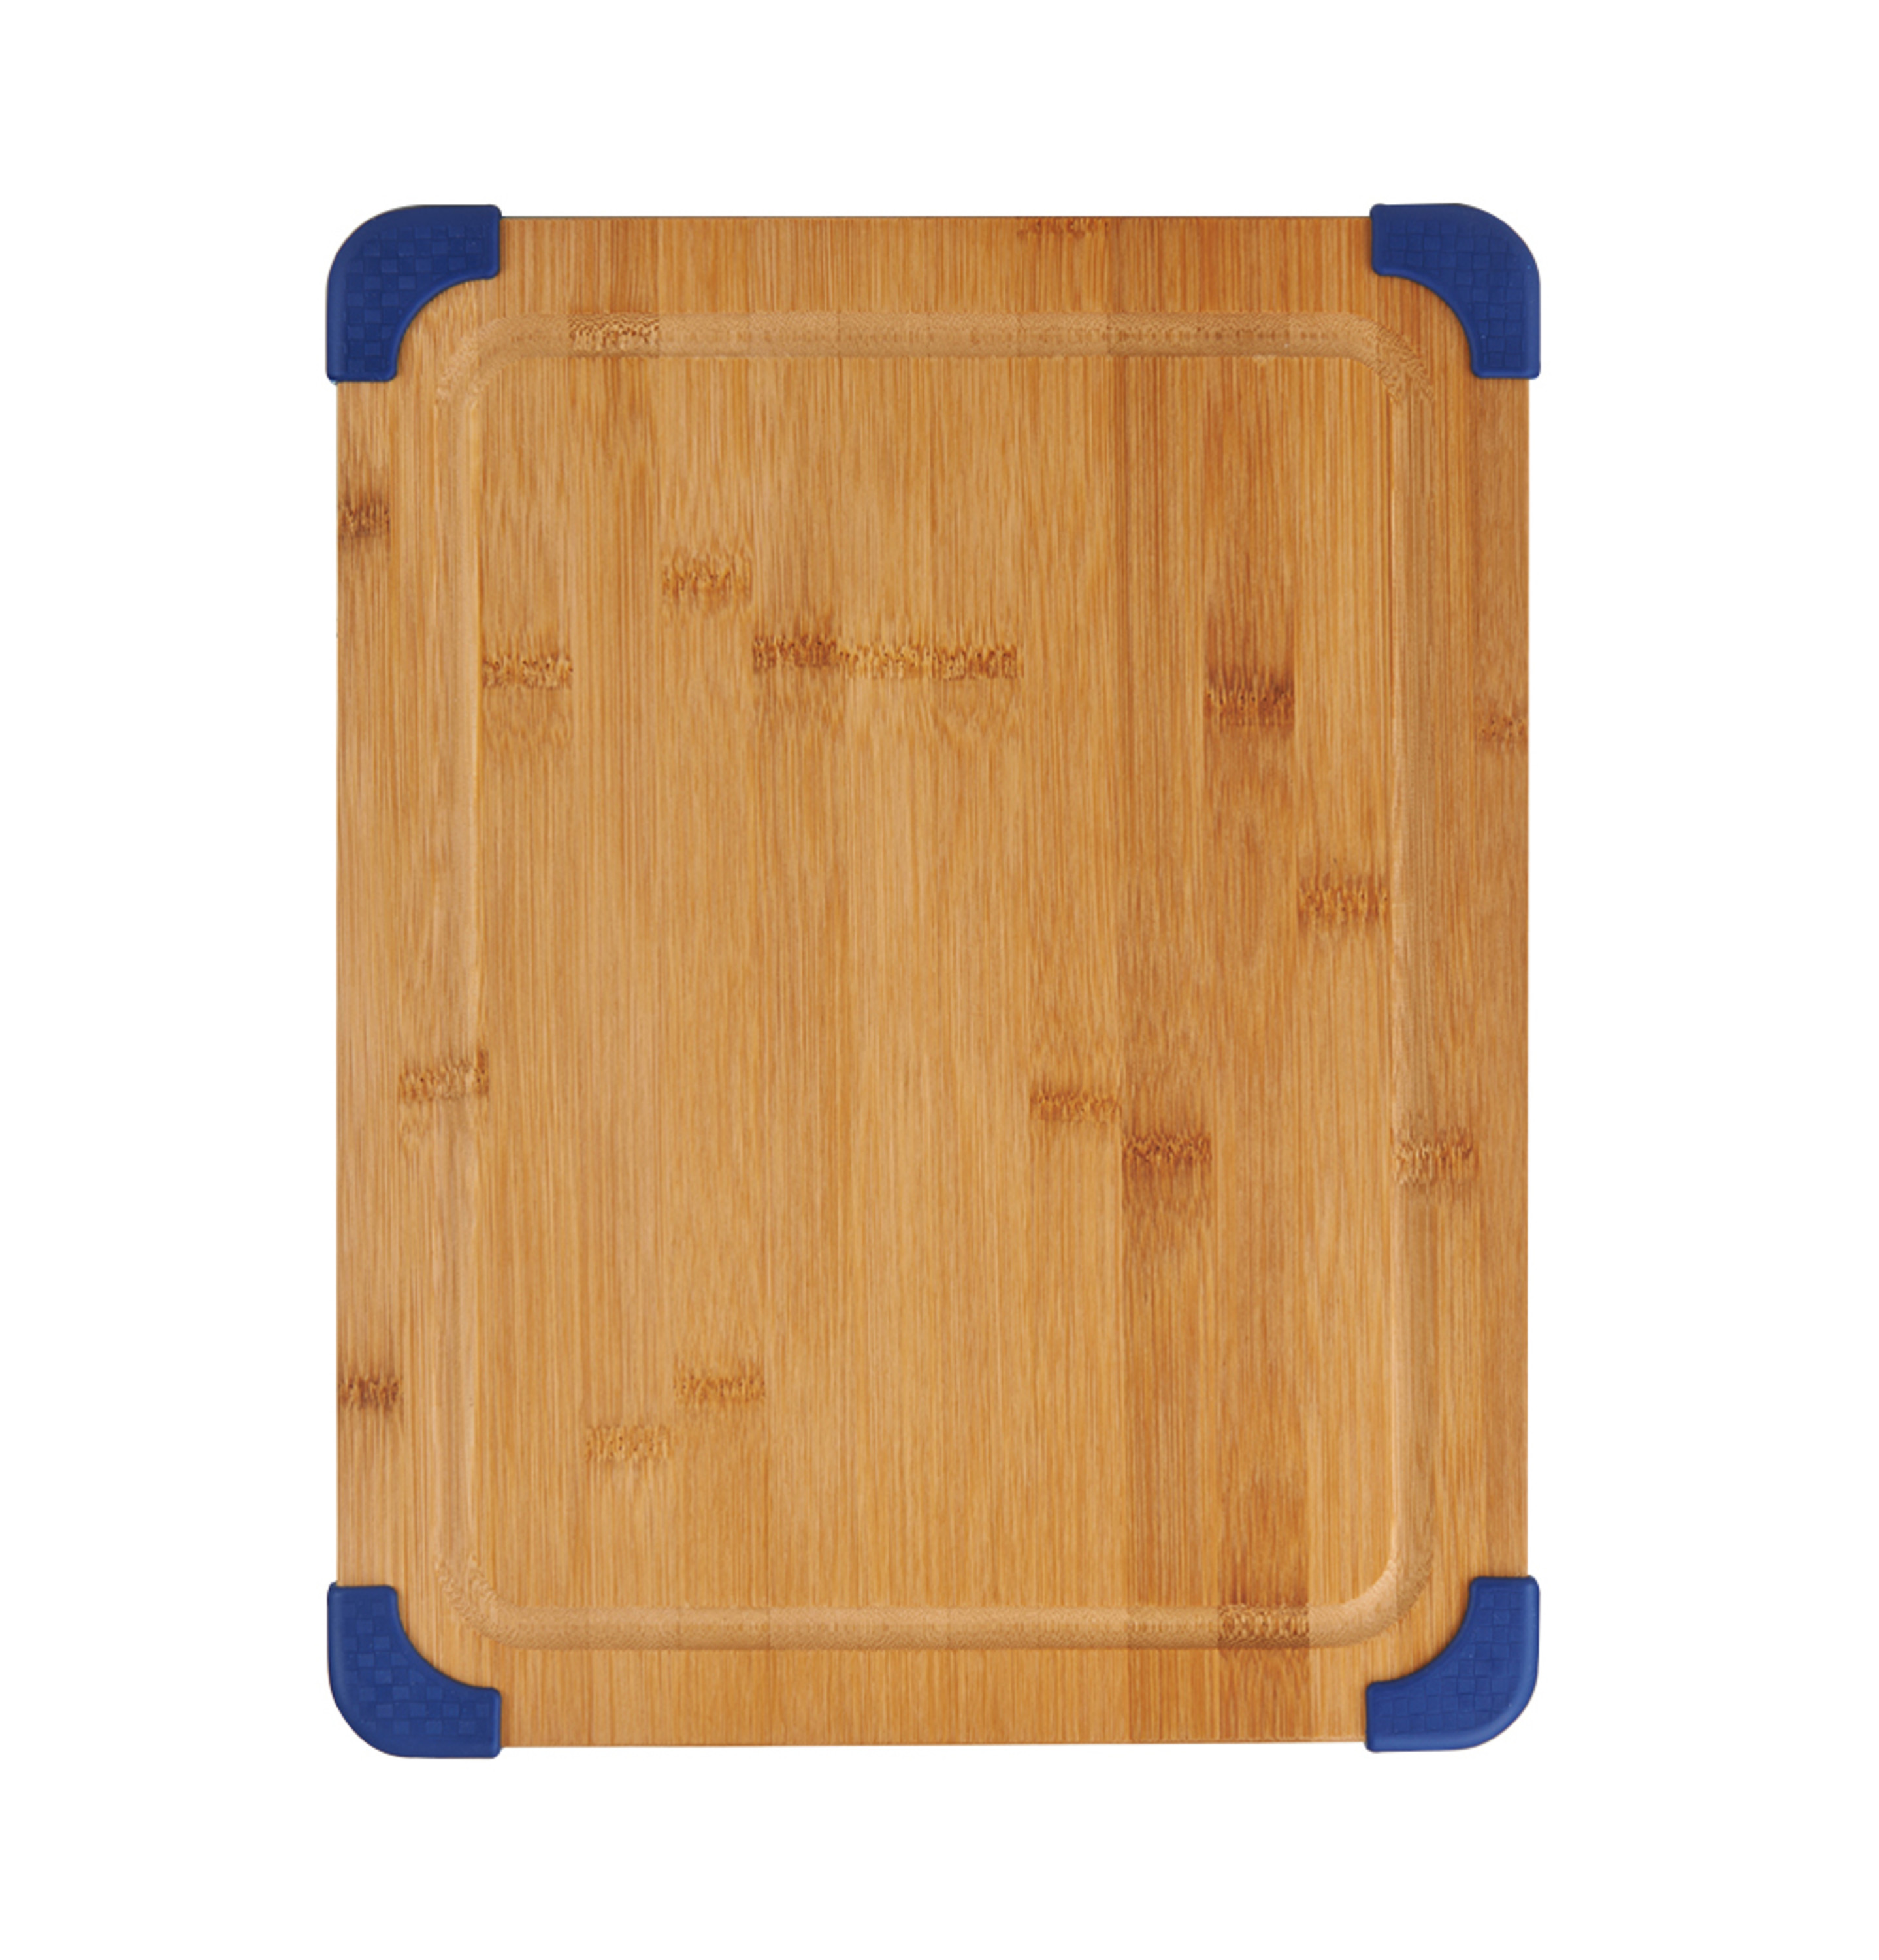 Farberware 11-inch x 14-inch Thick Bamboo Cutting Board with Nonslip Corners, Store Only Item, Assorted Colors, 1 Only - image 5 of 10